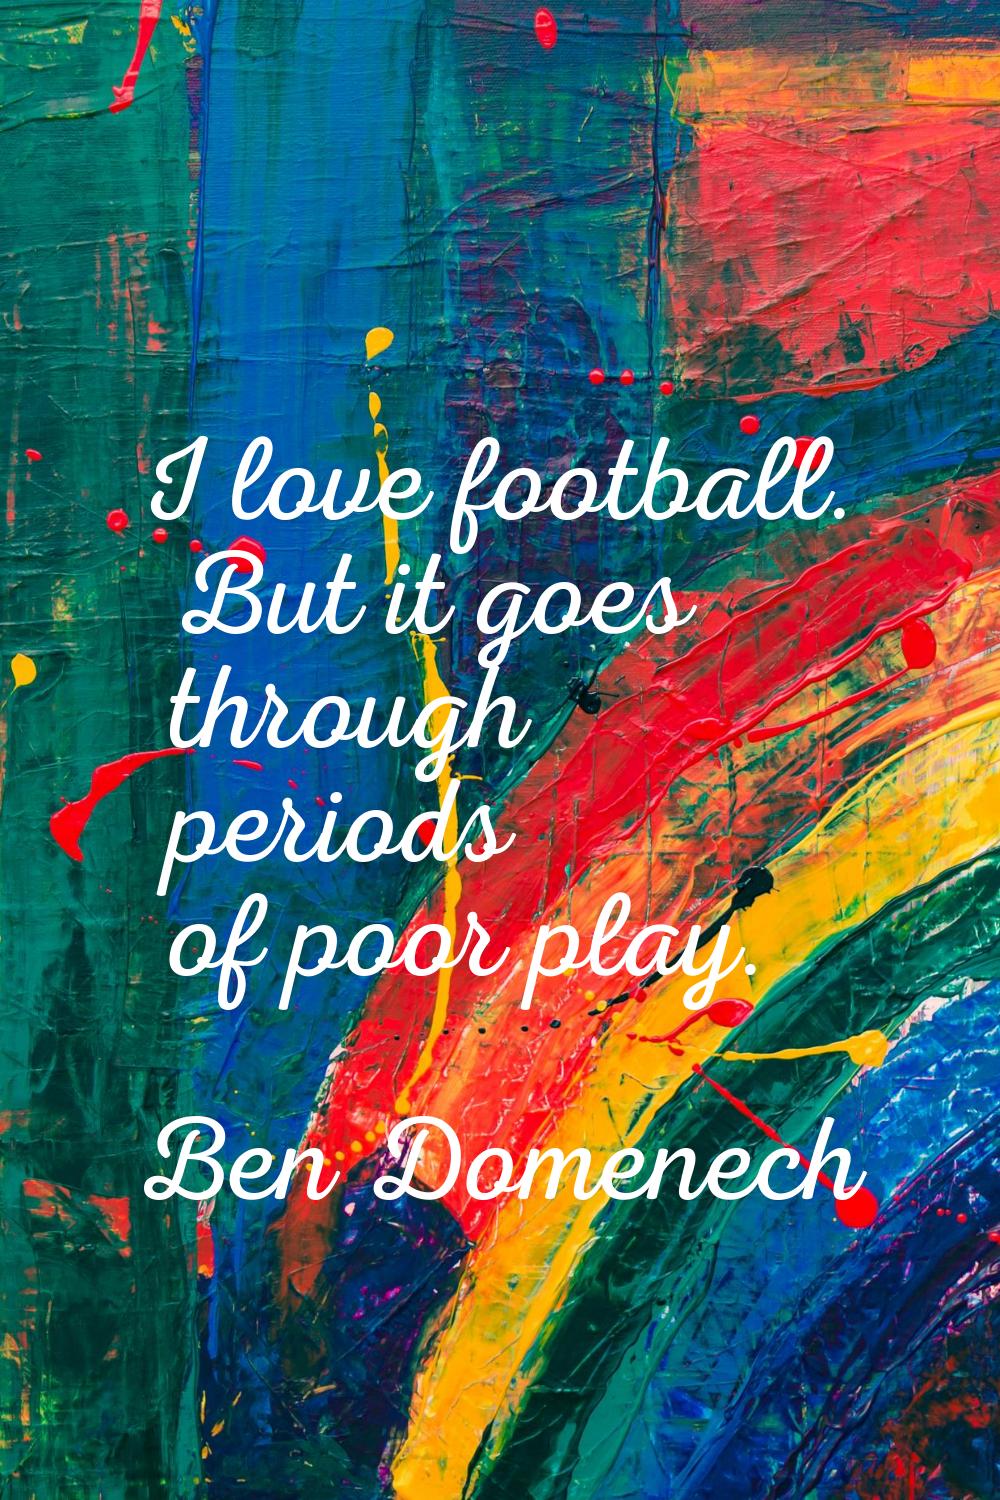 I love football. But it goes through periods of poor play.